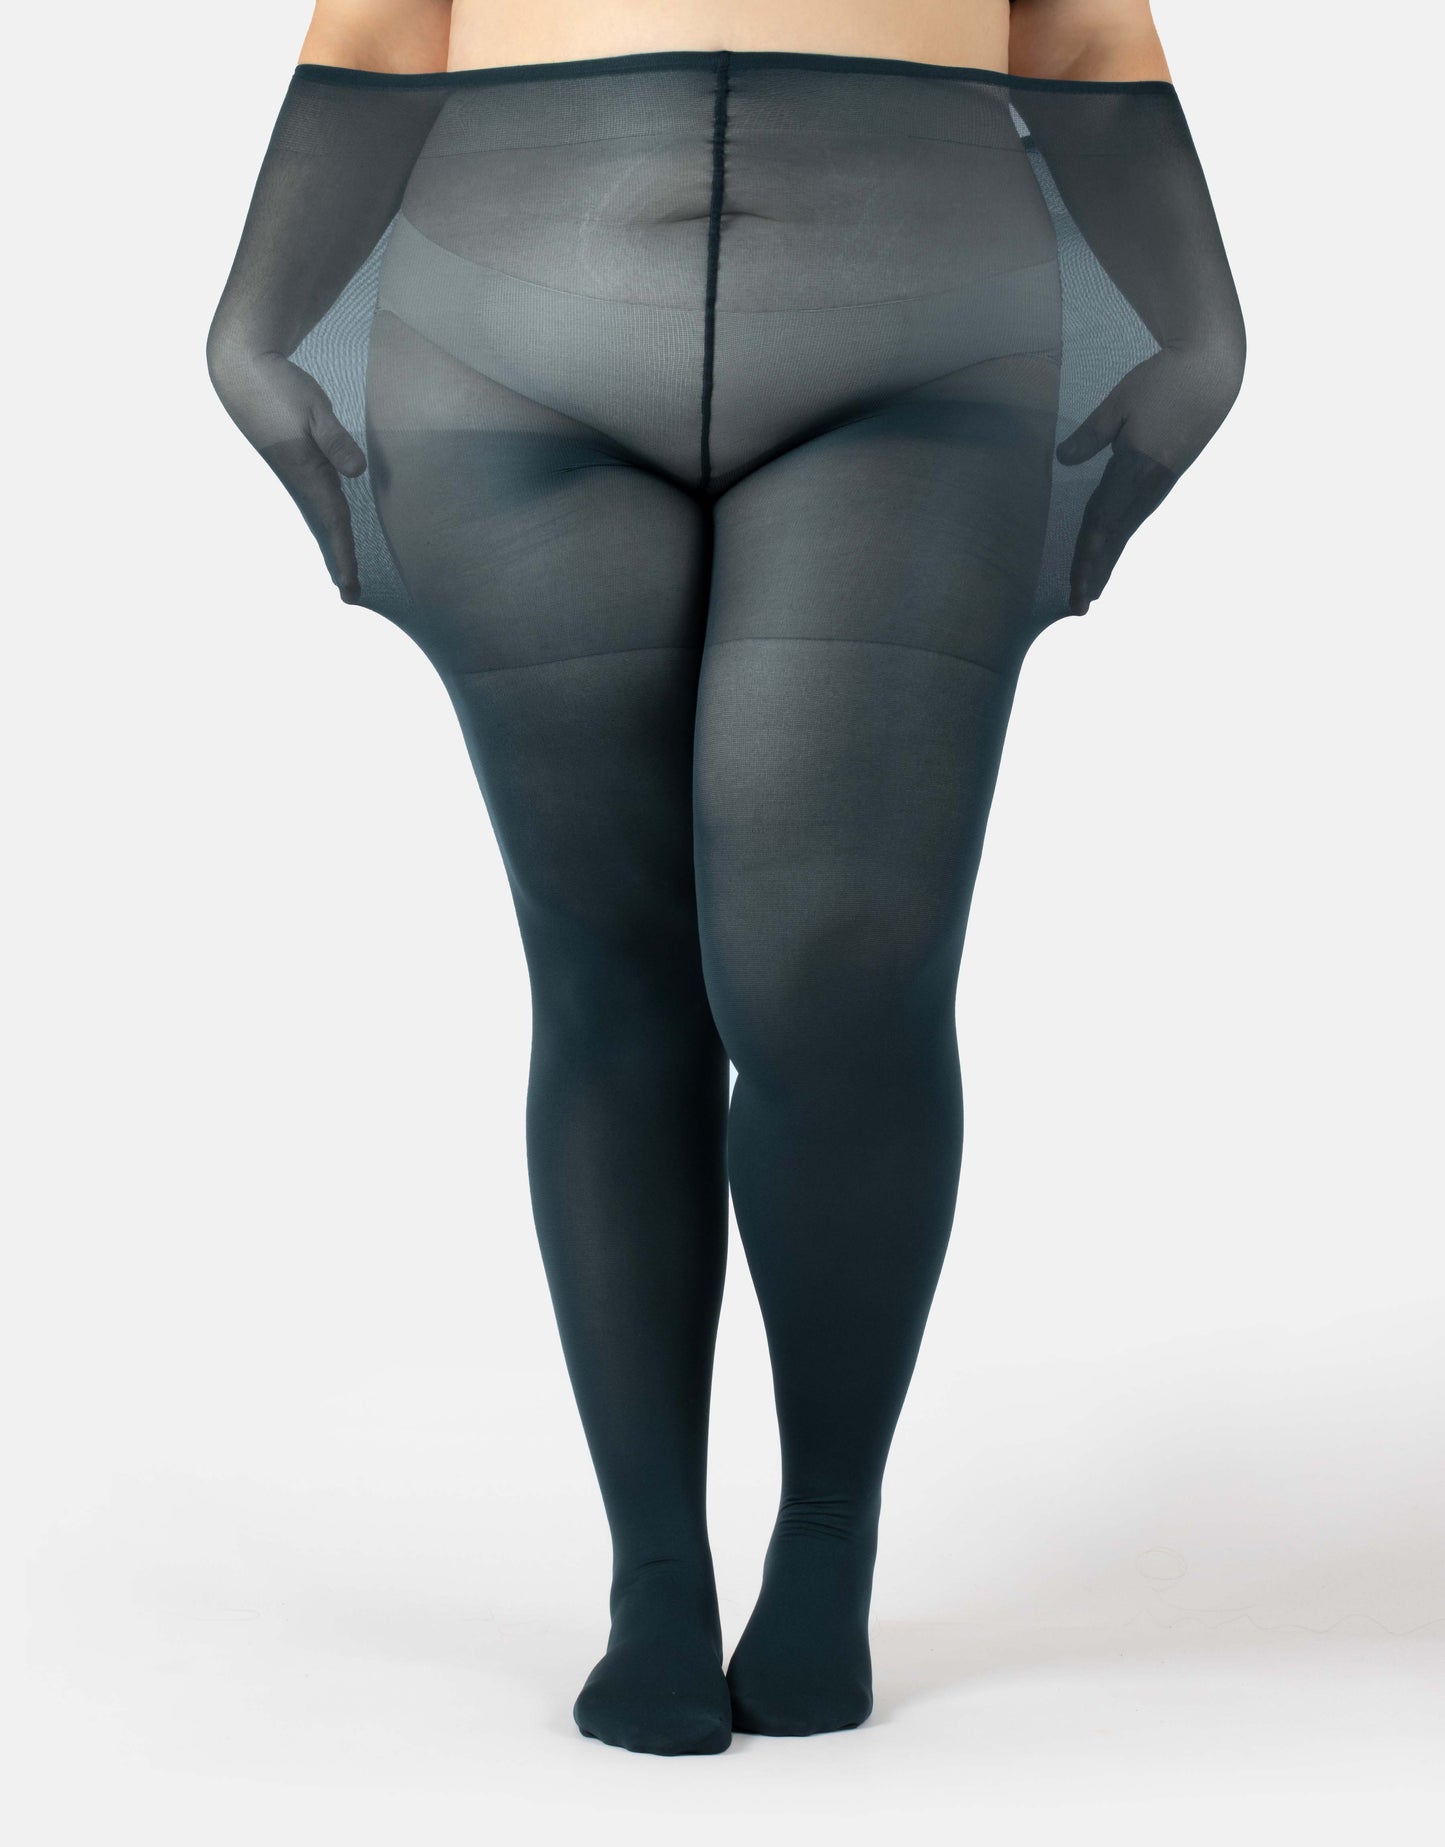 Calzitaly 60 Den Curvy Tights - Teal Green (mystic green) plain opaque plus size tights with a super elasticated boxer top, anti-chafing panels, flat seams and cotton gusset.